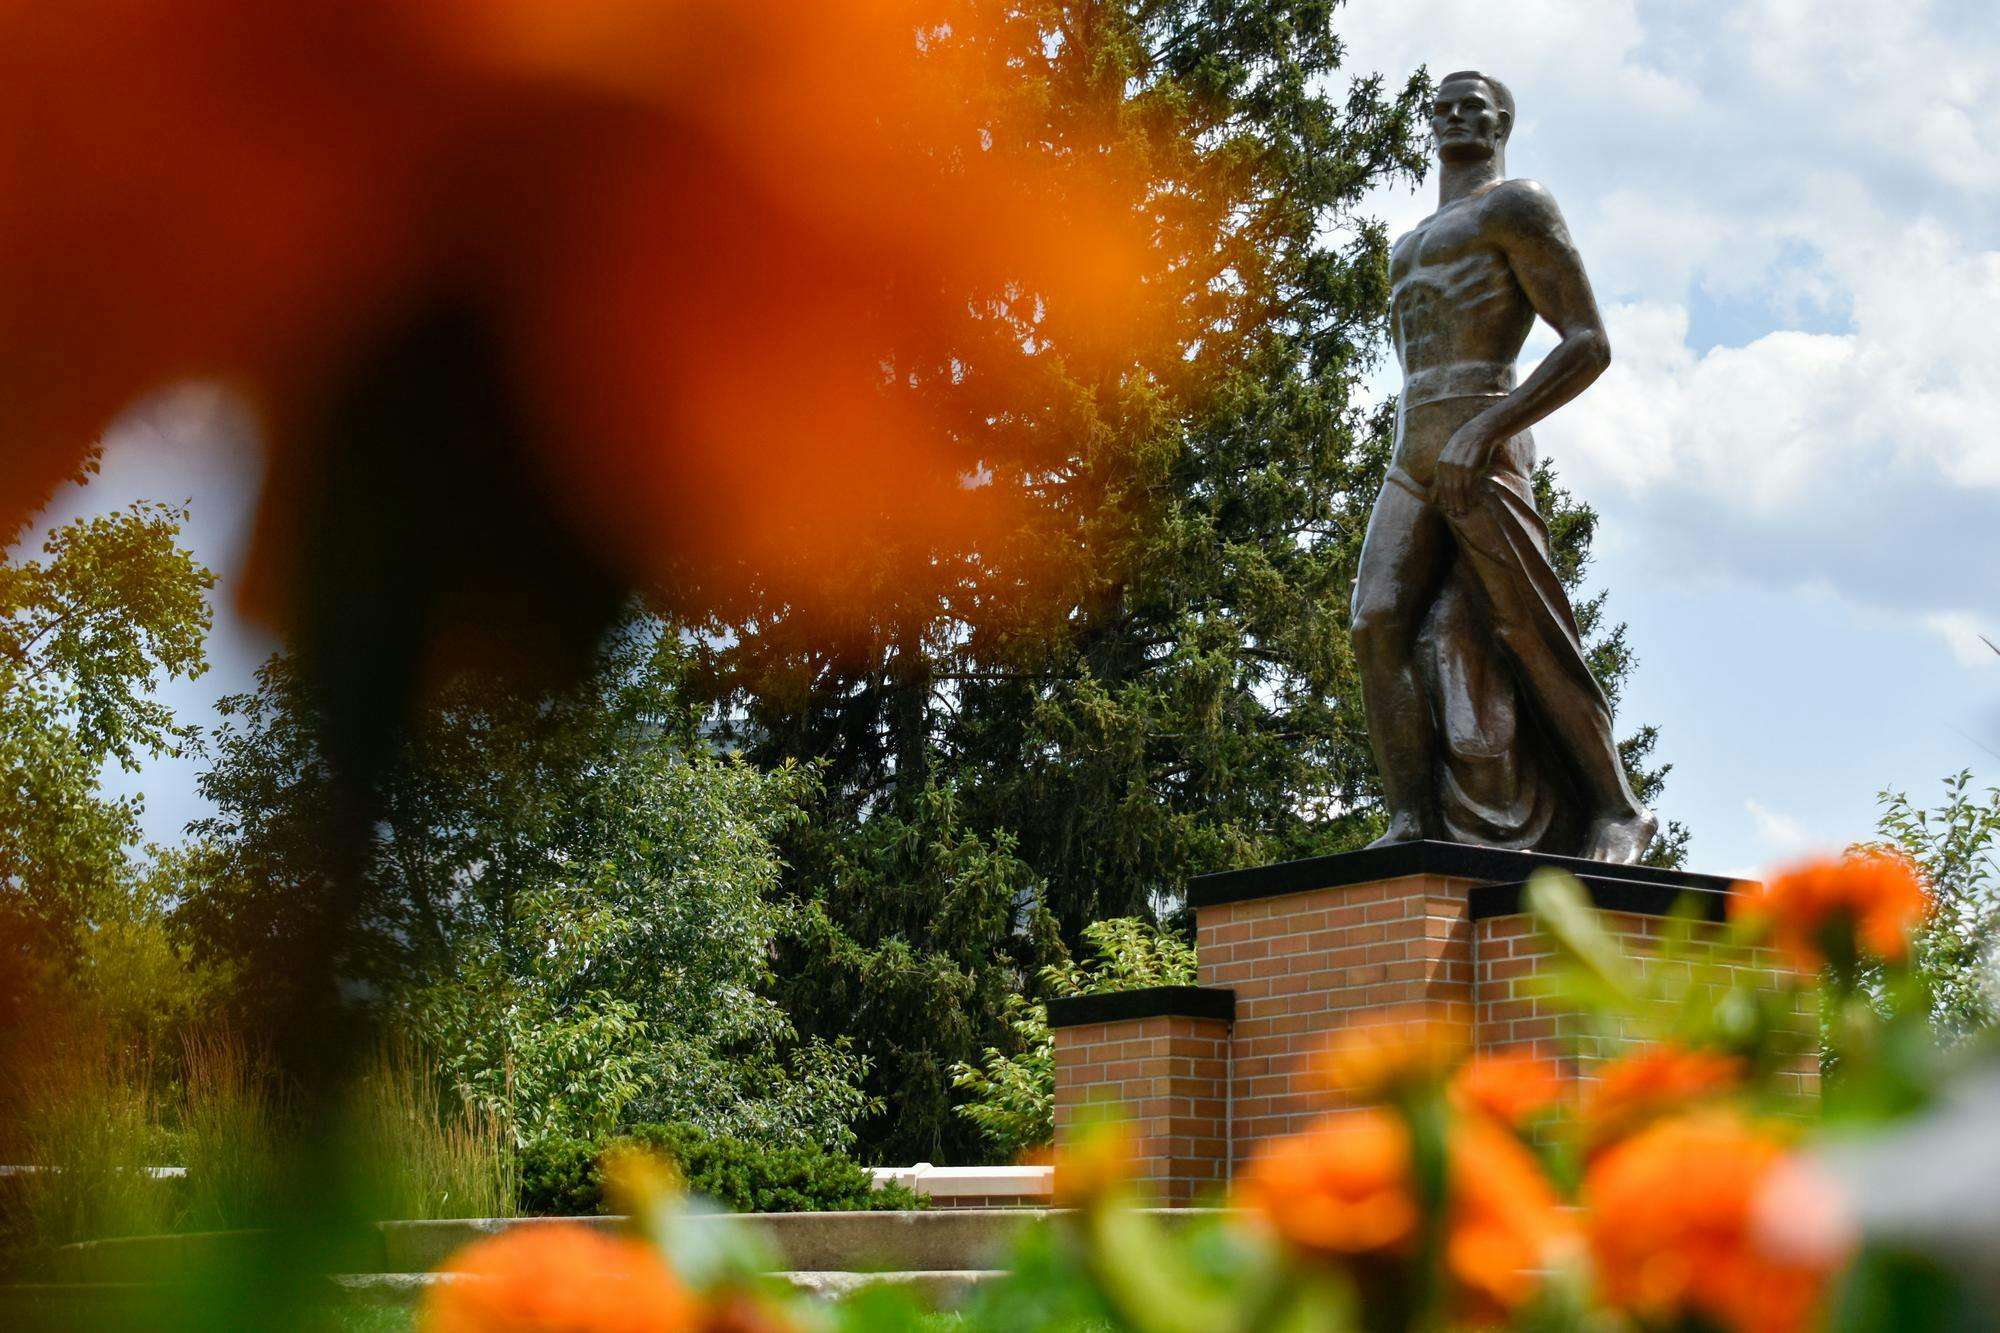 Orange and white flowers surround the Spartan Statue on July 19, 2023.